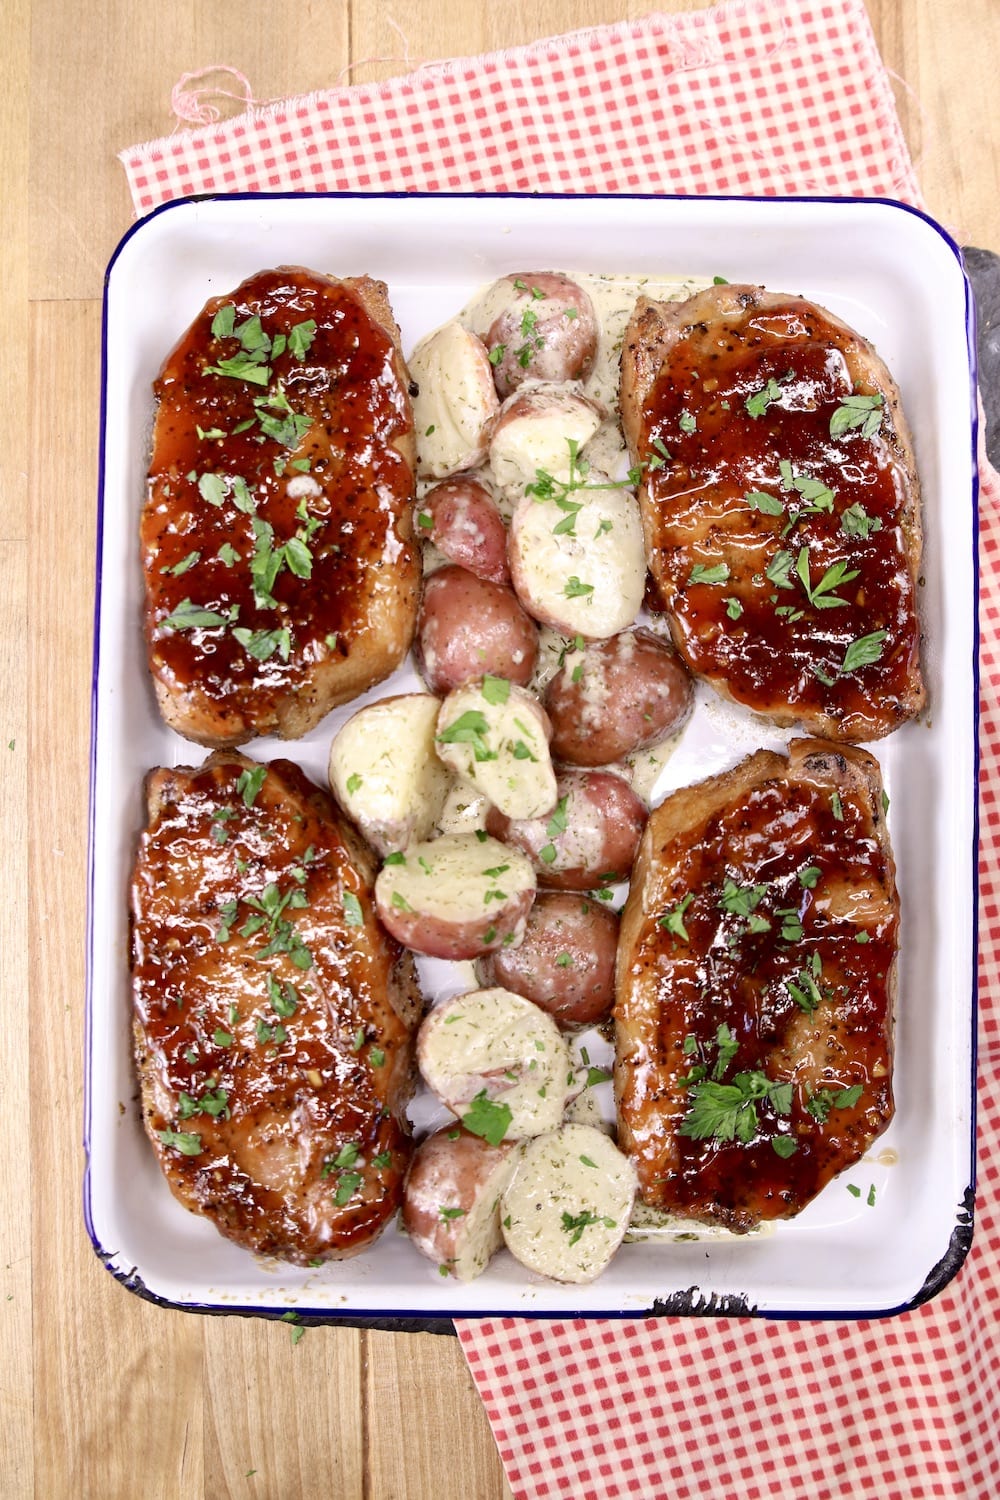 Pan of 4 bbq pork chops with red potatoes in center